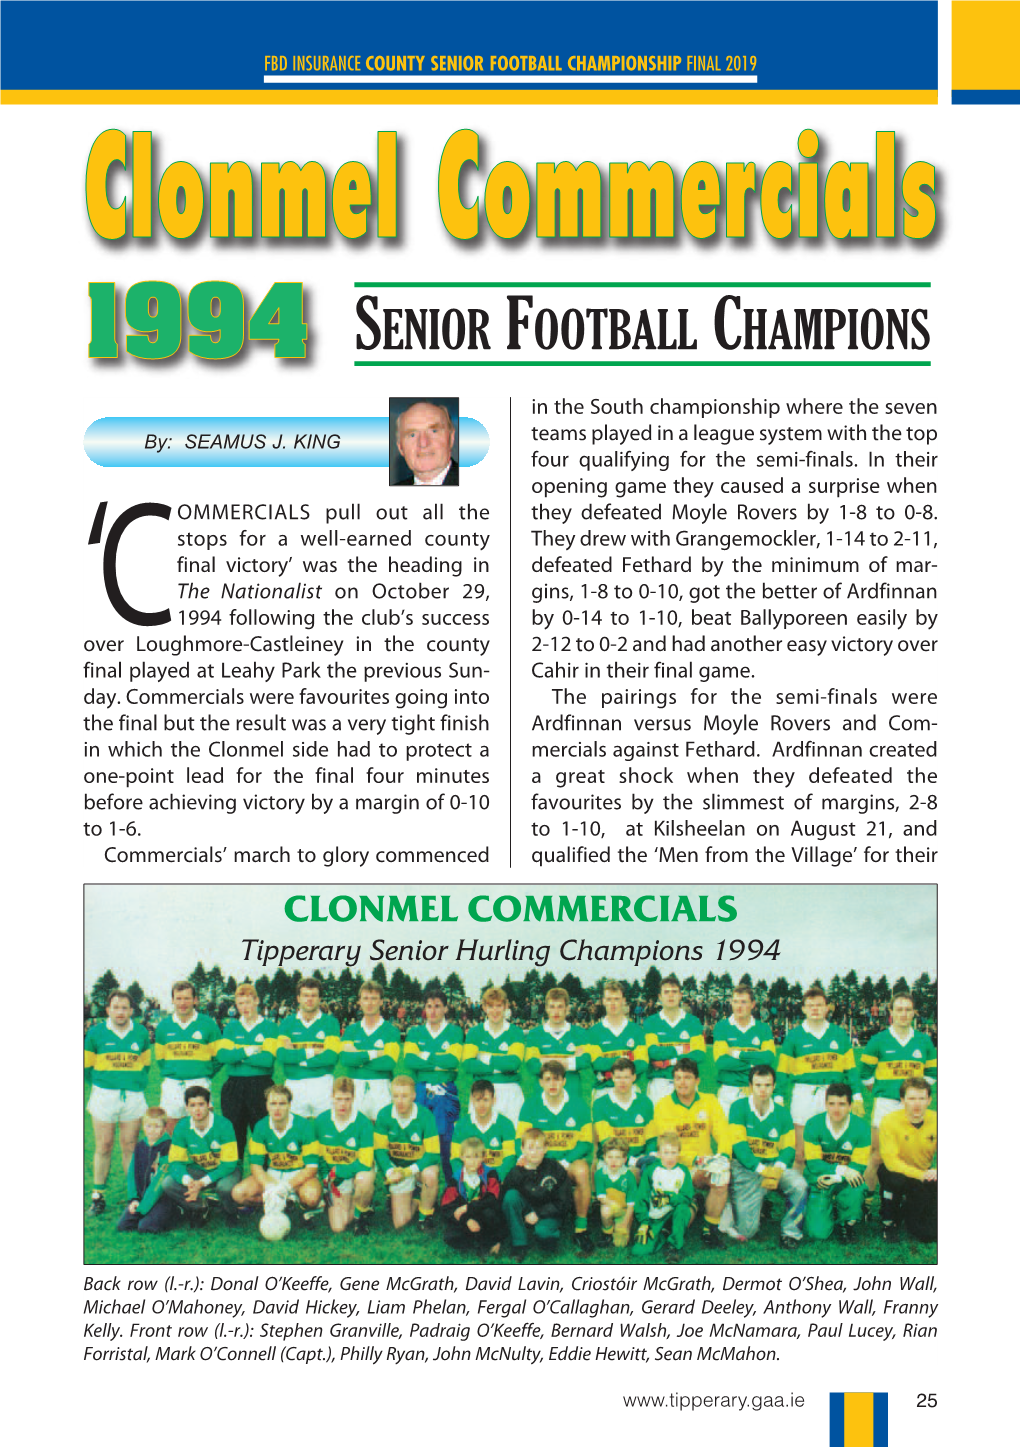 Clonmel Commercials 1994 SENIOR FOOTBALL CHAMPIONS in the South Championship Where the Seven Teams Played in a League System with the Top By: SEAMUS J